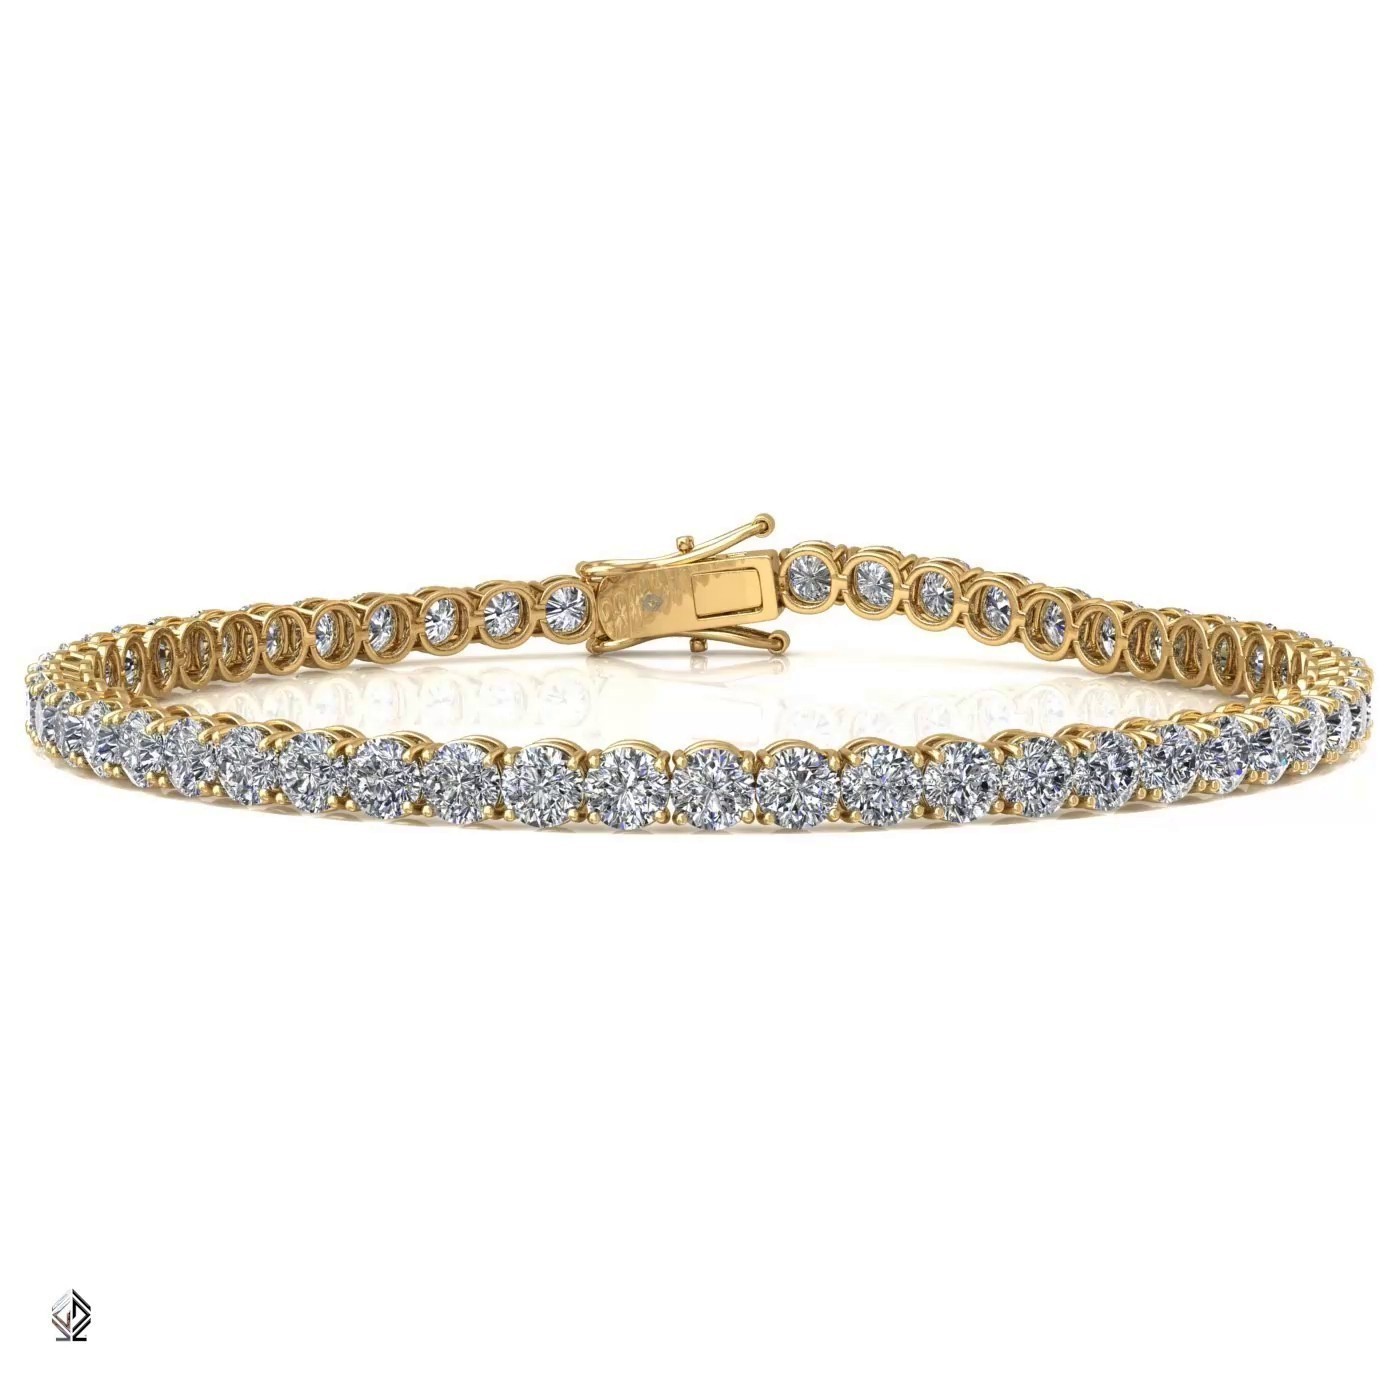 18k yellow gold 4.2mm 4 prong round shape diamond tennis bracelet in round setting Photos & images